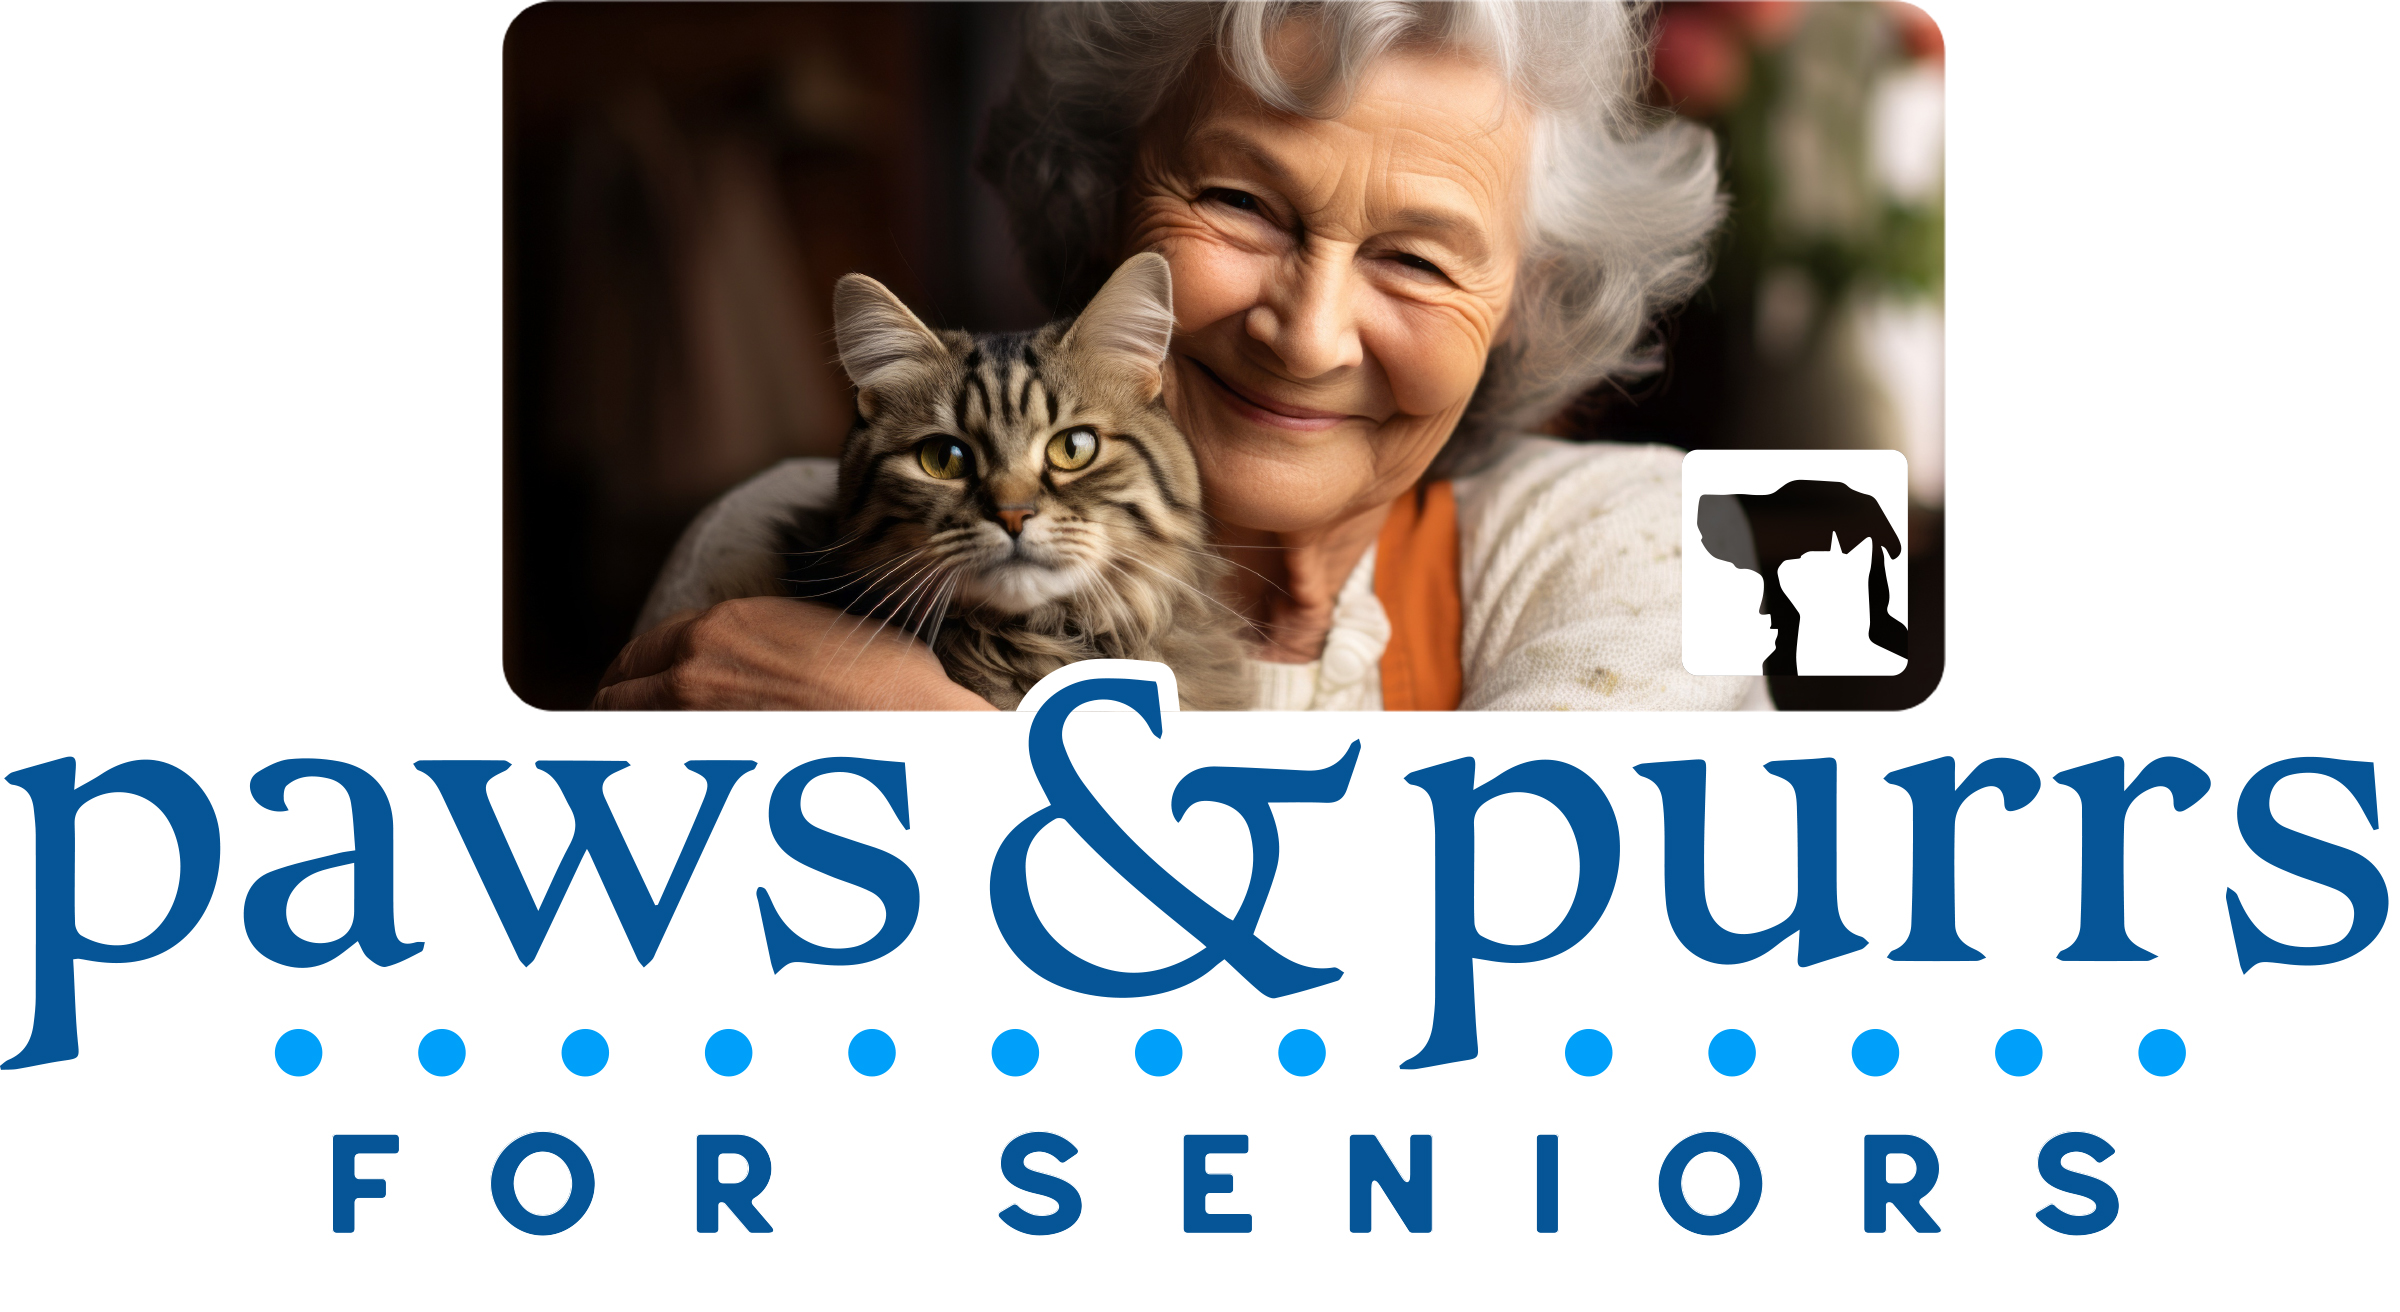 The logo for paws and purrs for seniors program.